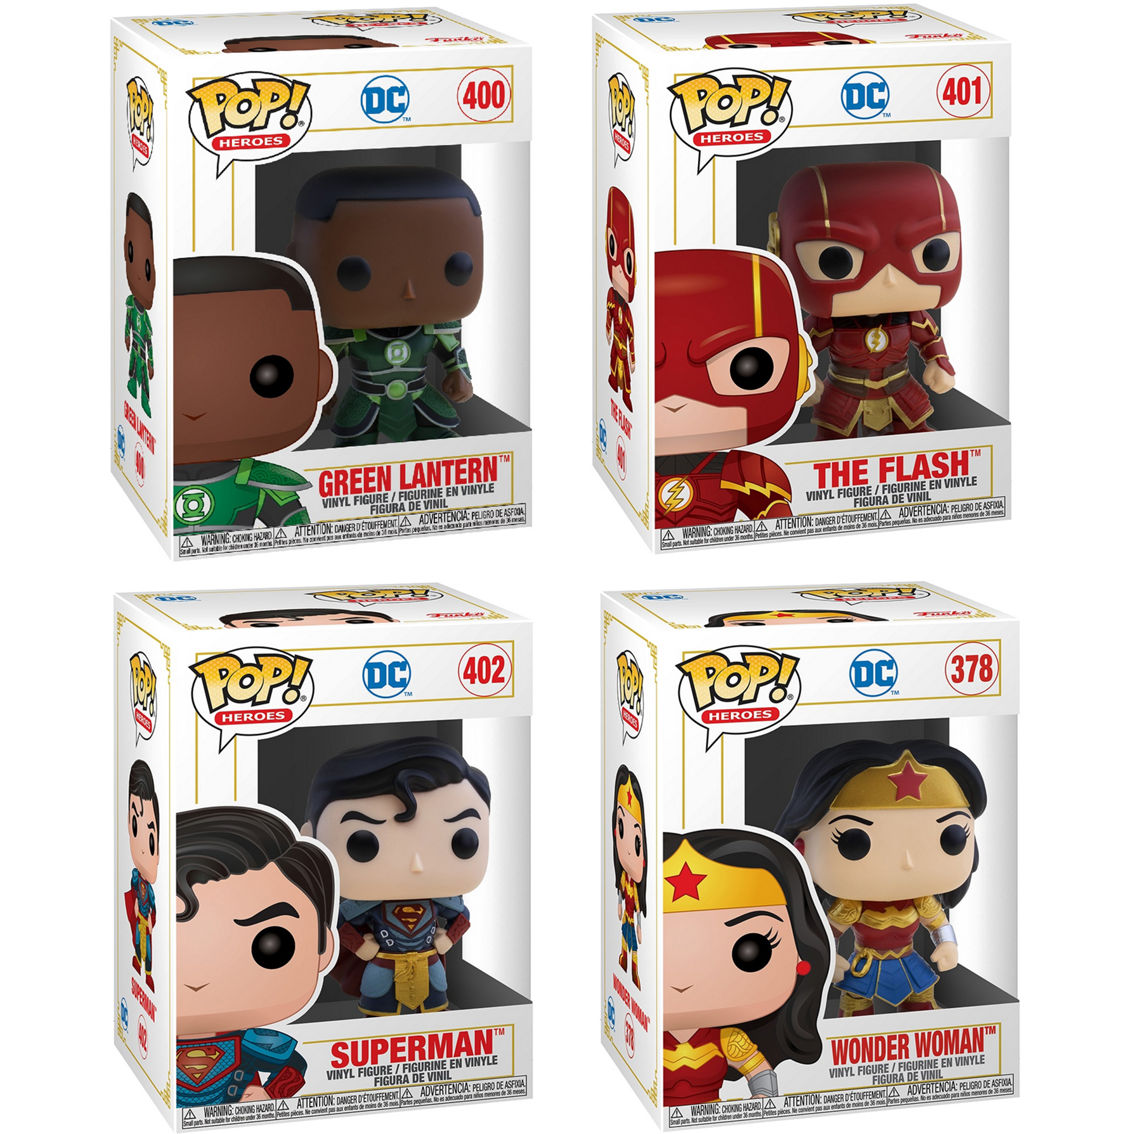 Funko POP! DC Heroes Imperial Palace Collector's Set - Image 2 of 7